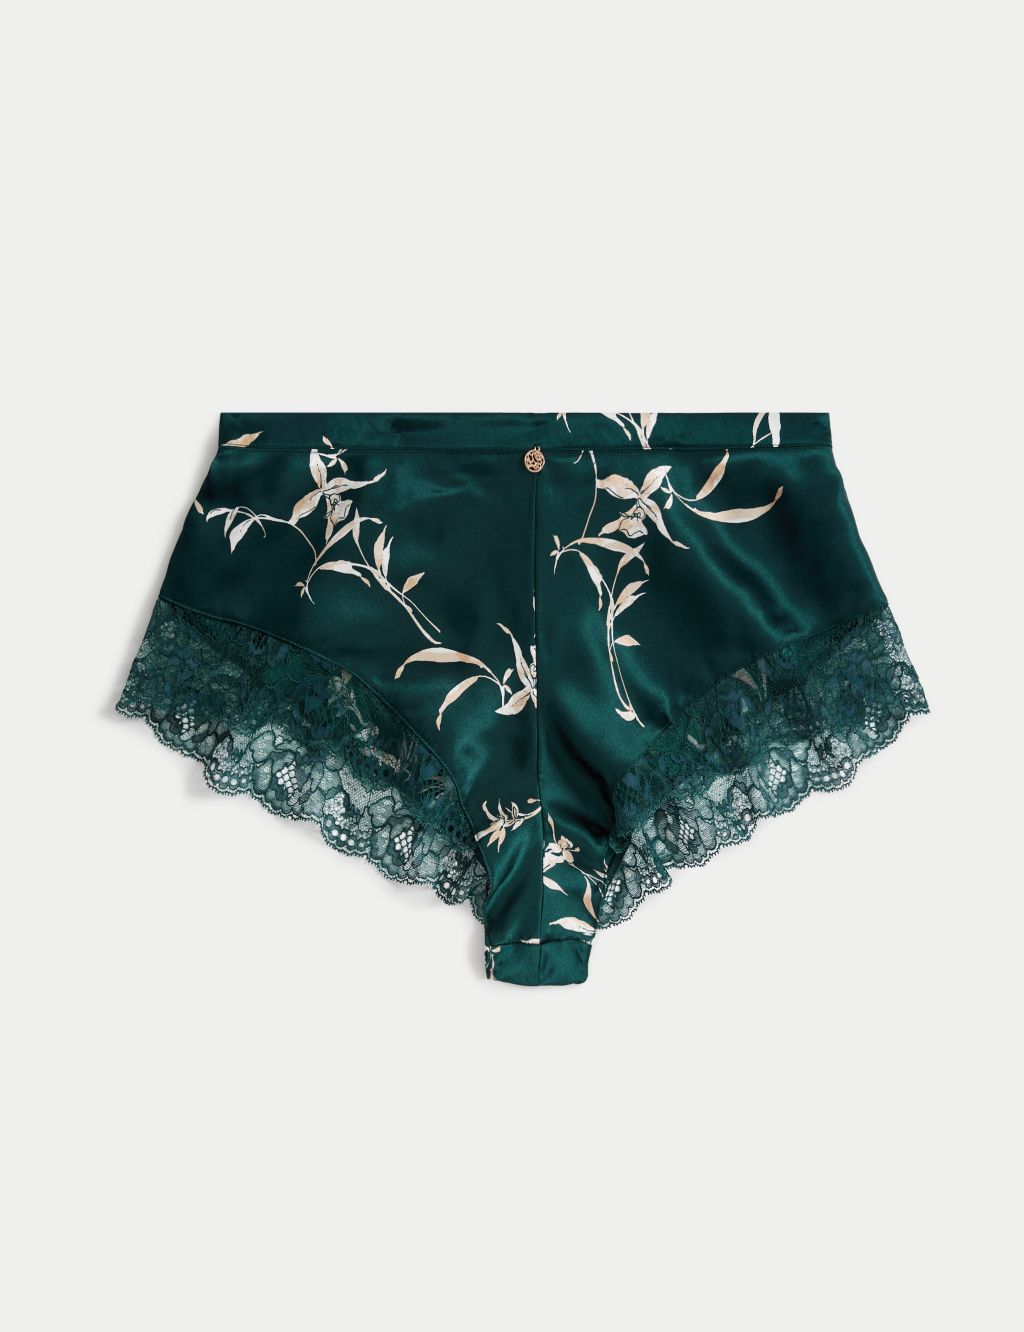 Cassia Silk & Lace French Knickers image 2